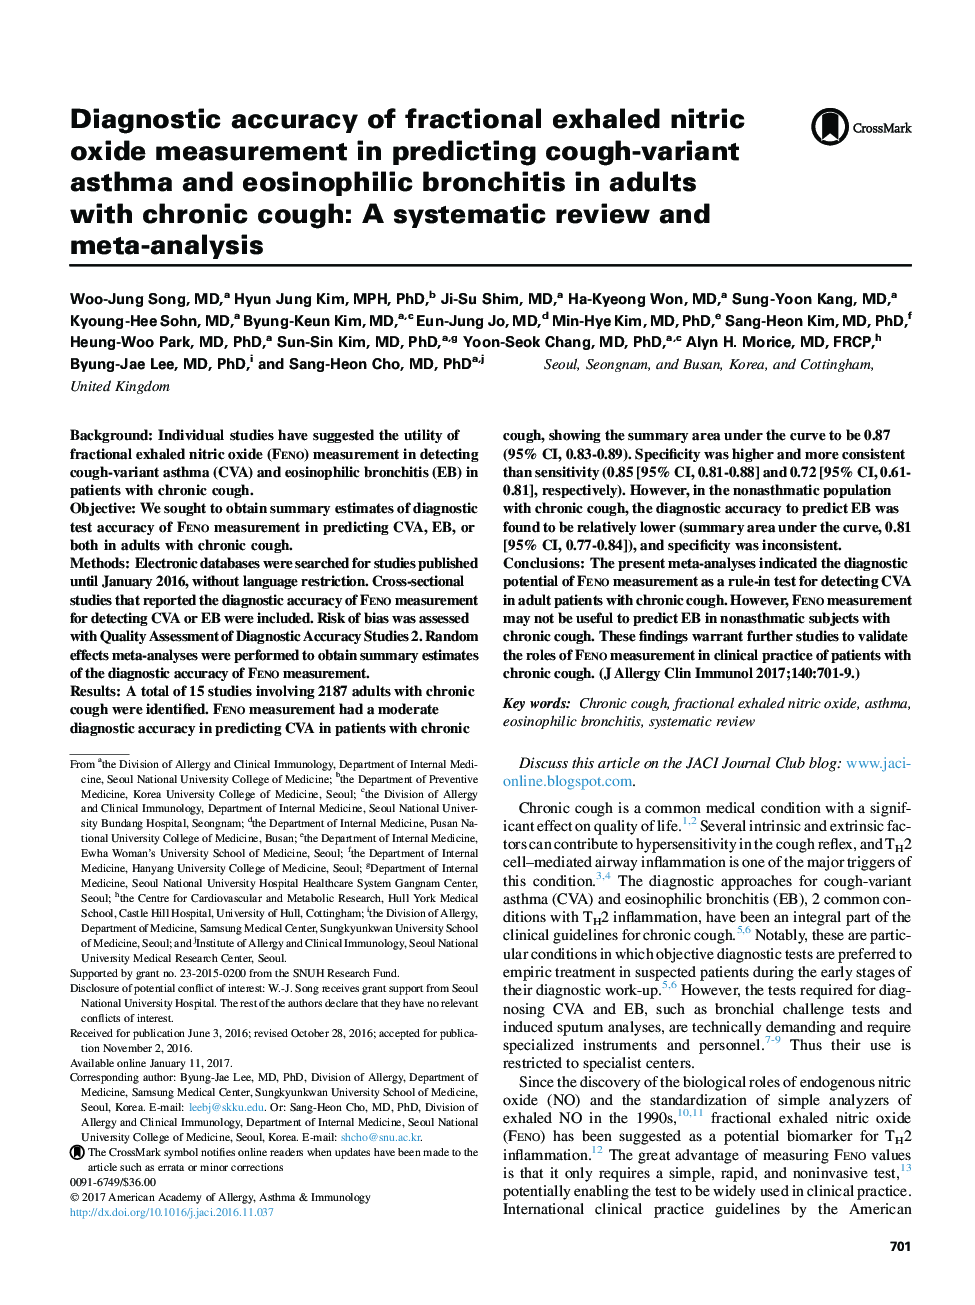 Diagnostic accuracy of fractional exhaled nitric oxide measurement in predicting cough-variant asthma and eosinophilic bronchitis in adults withÂ chronic cough: AÂ systematic review and meta-analysis